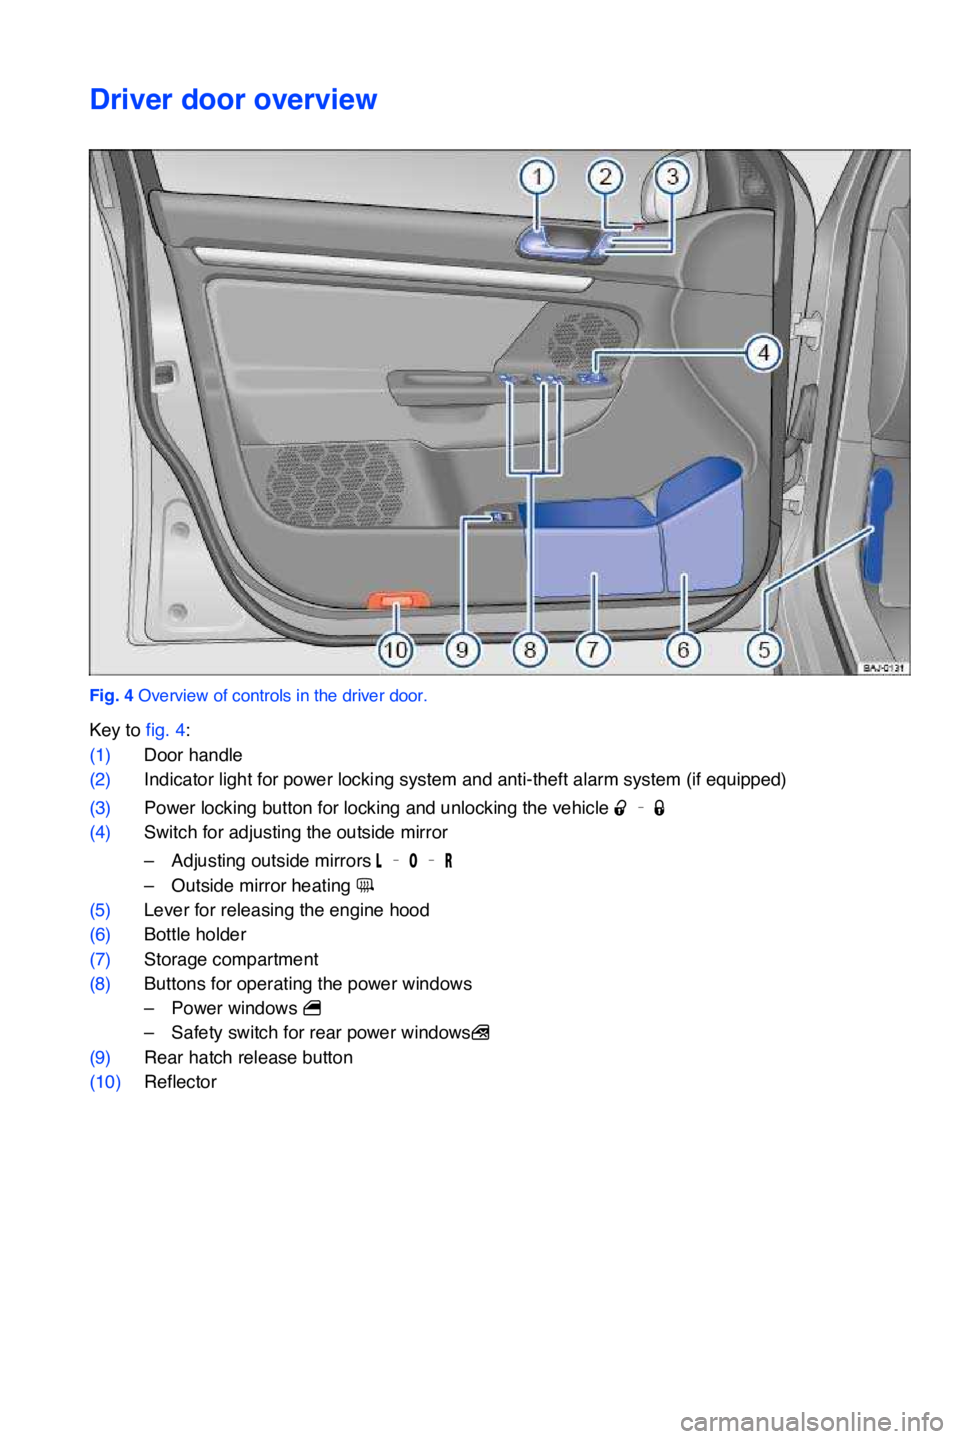 VOLKSWAGEN JETTA SPORTWAGEN 2013  Owners Manual Driver door overview
Fig. 4 Overview of controls in the driver door.
Key to fig. 4:
(1)Door handle 
(2)Indicator light for power locking system and anti-theft alarm system (if equipped) 
(3)Power lock